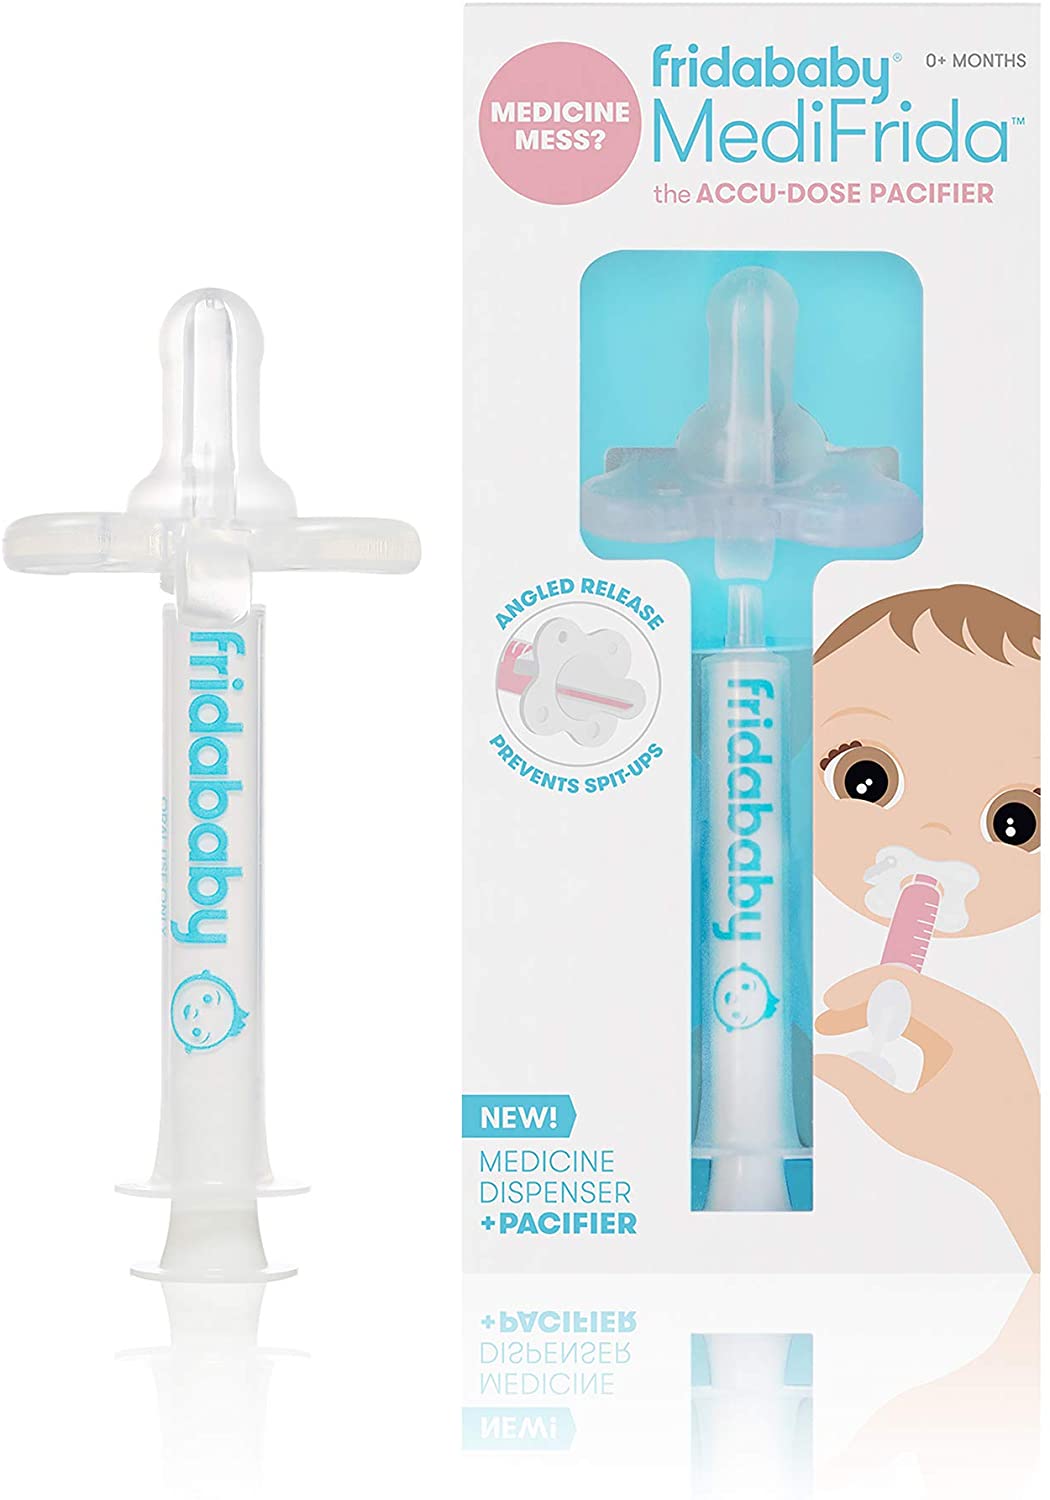 Fridababy: MediFrida The Accu-Dose Pacifier